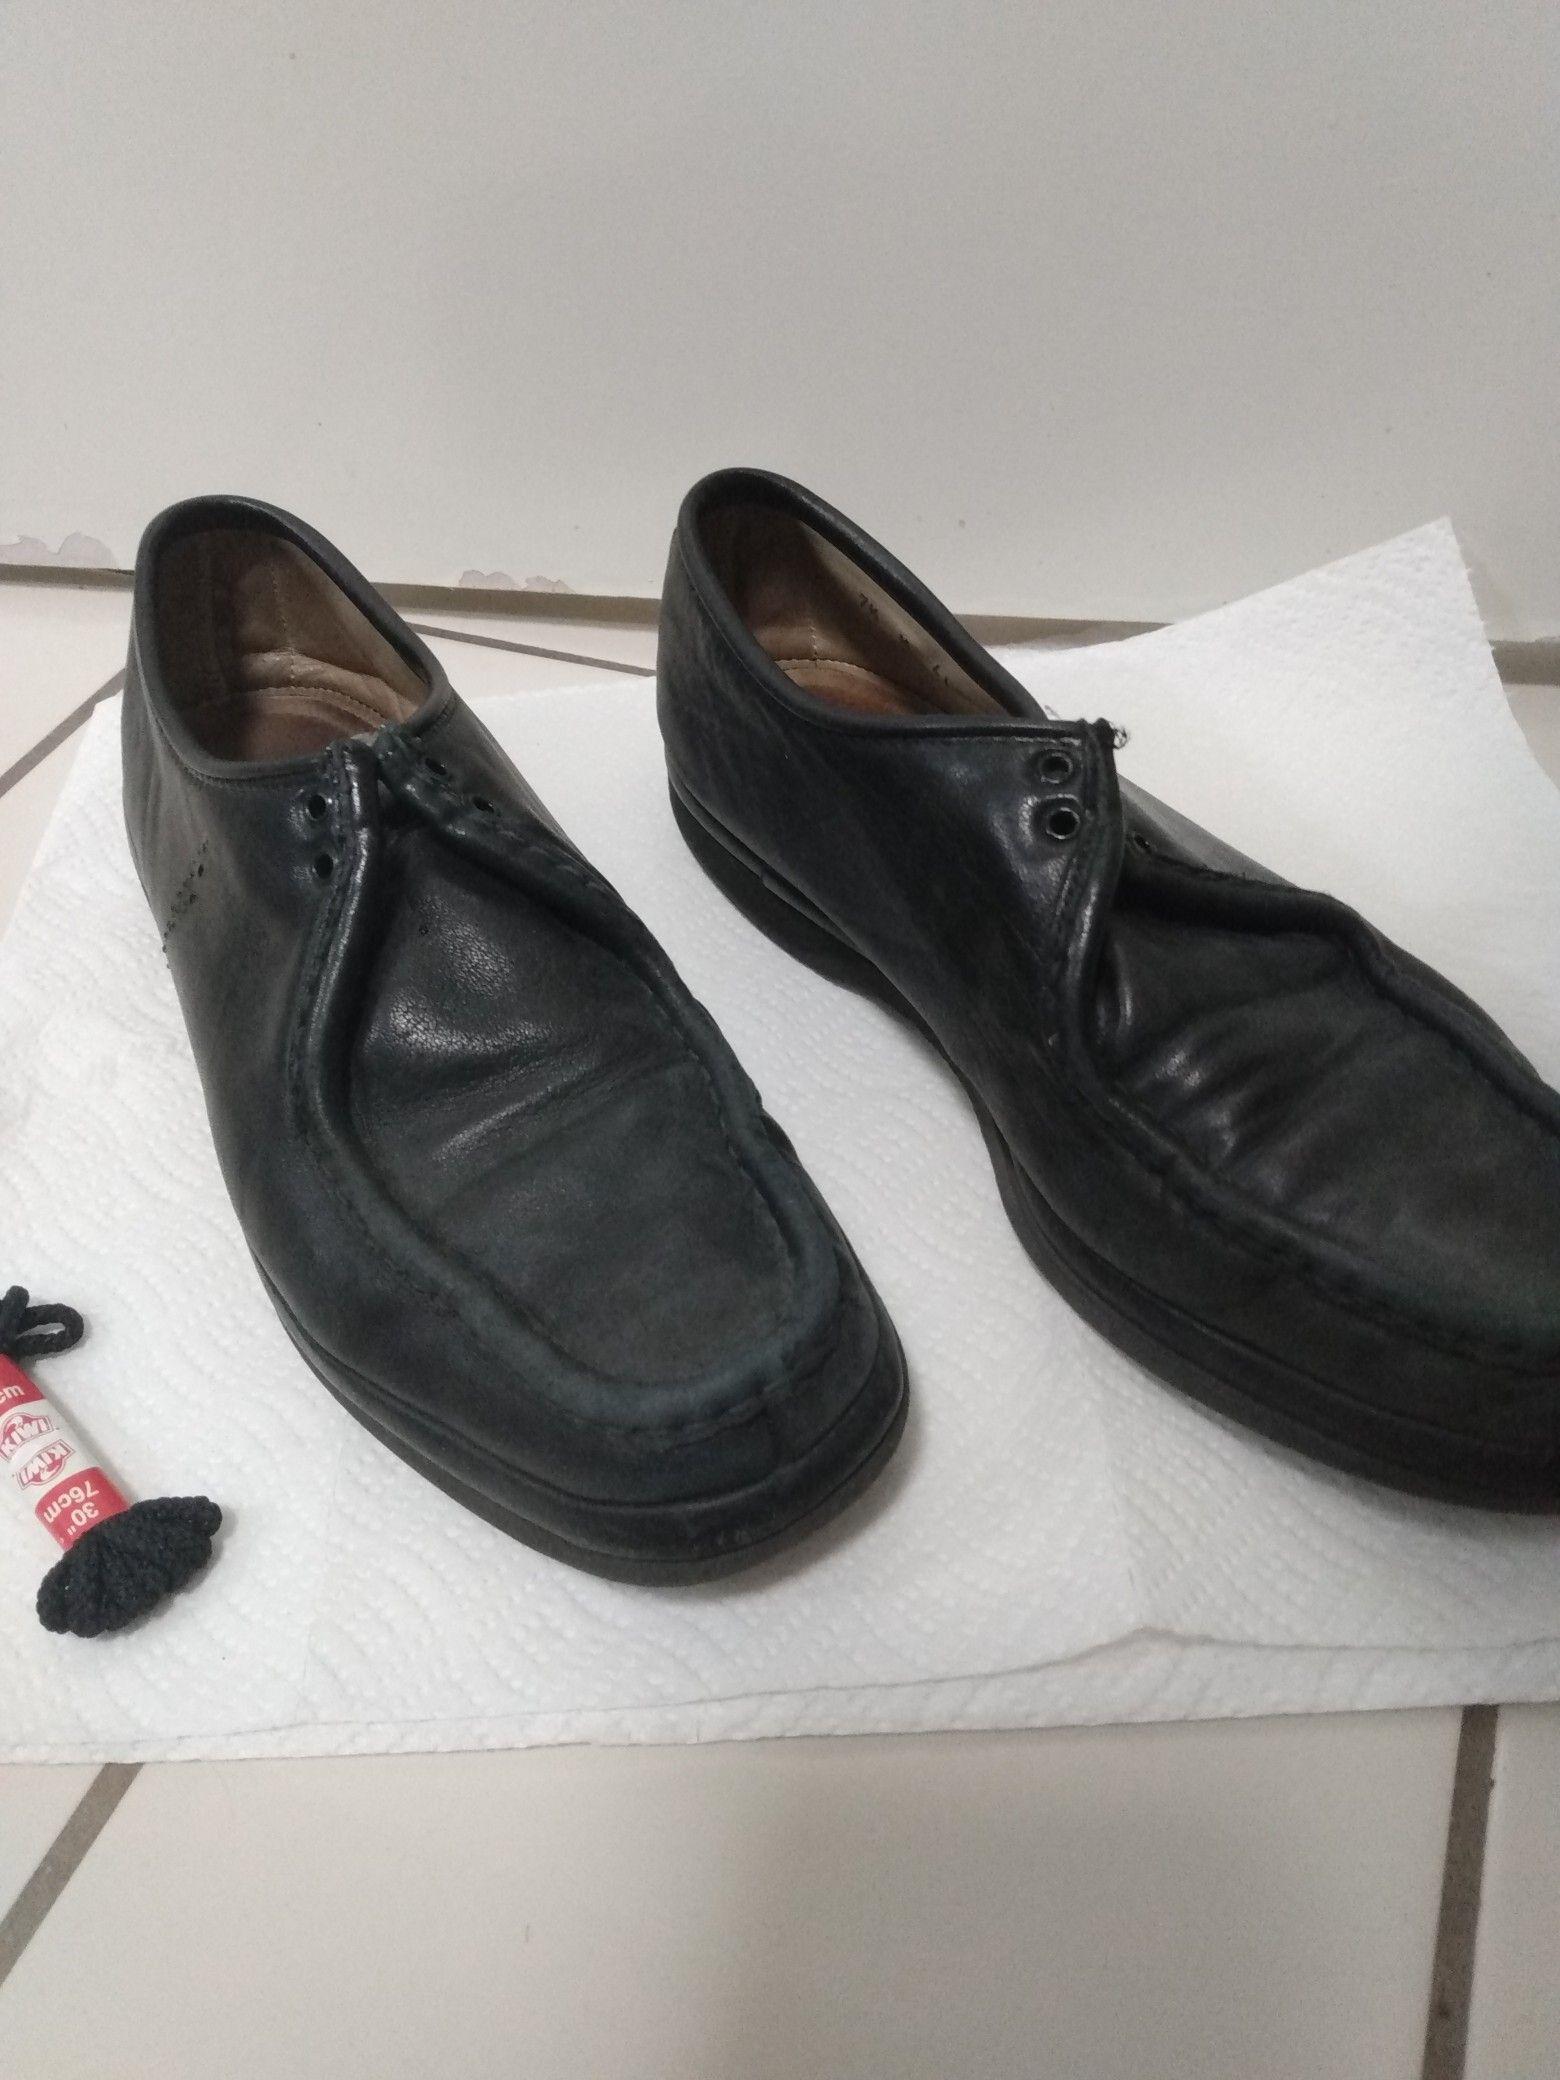 FREE MENS LEATHER SHOES $0.